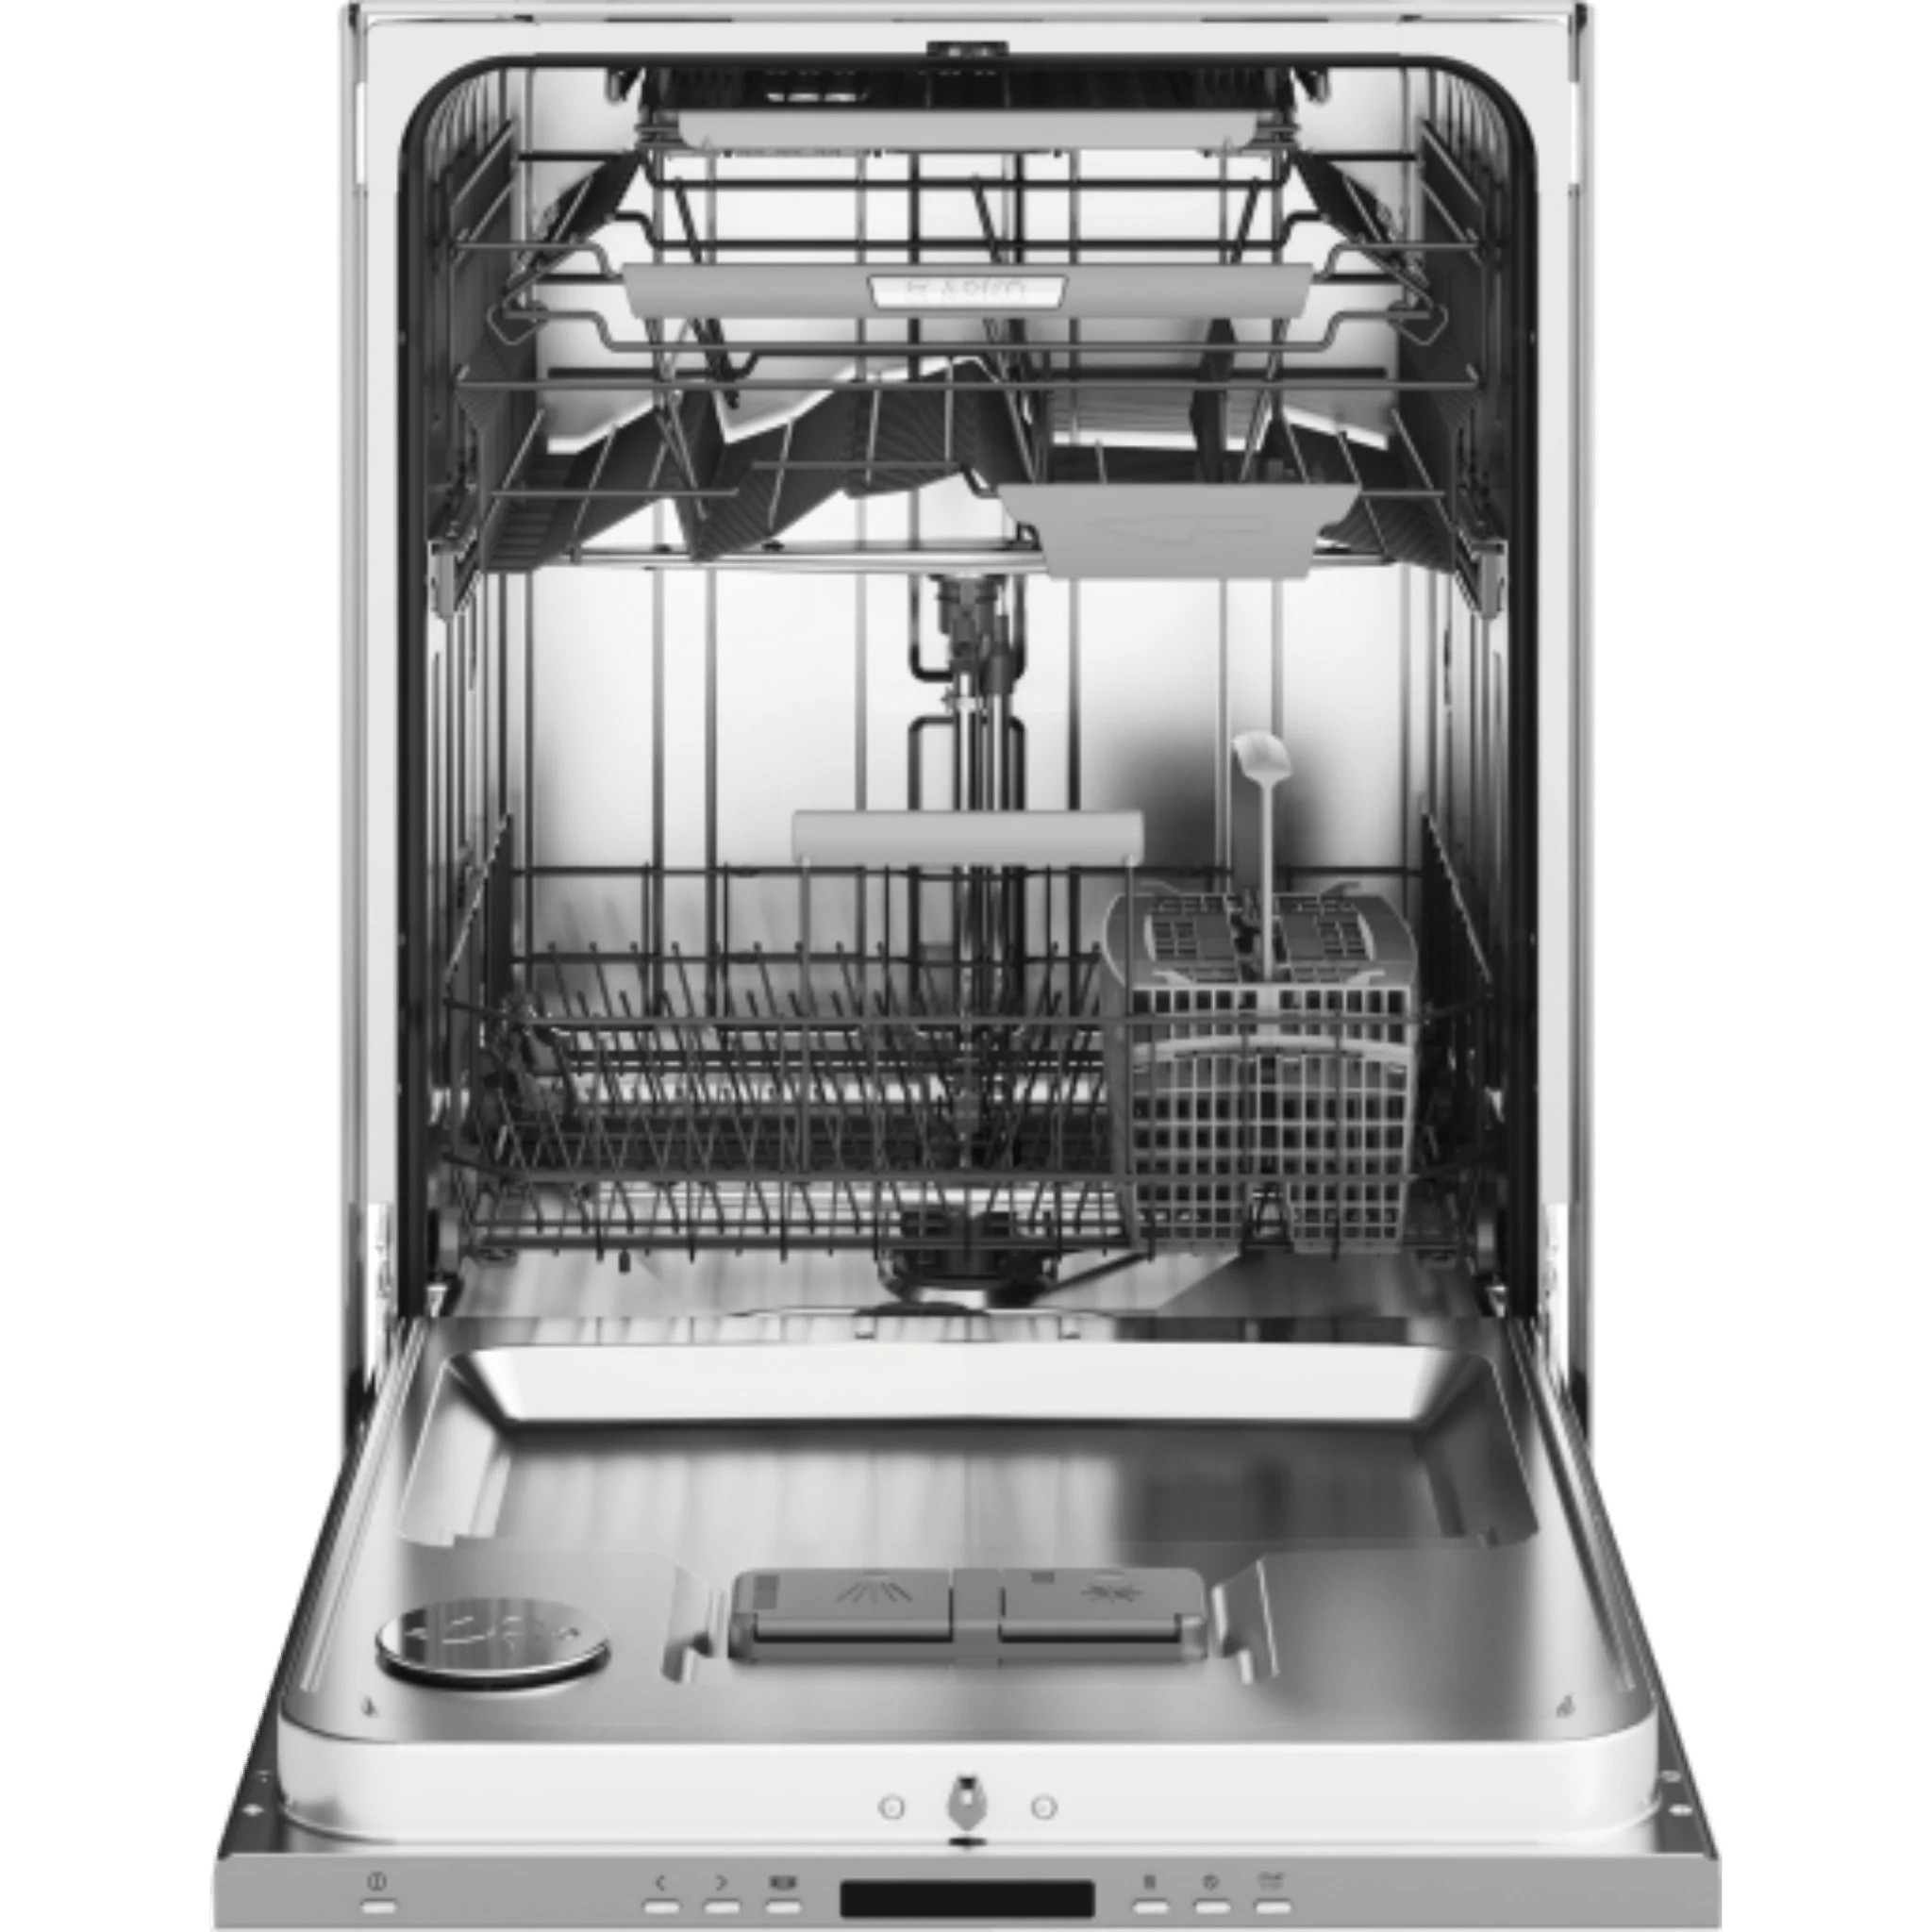 Asko 30 Series 24 Inch Wide 16 Place Setting Energy Star Rated Built-In Top Control Dishwasher with Condensation Drying and Water Softener Dishwashers DBI663ISSOF Luxury Appliances Direct